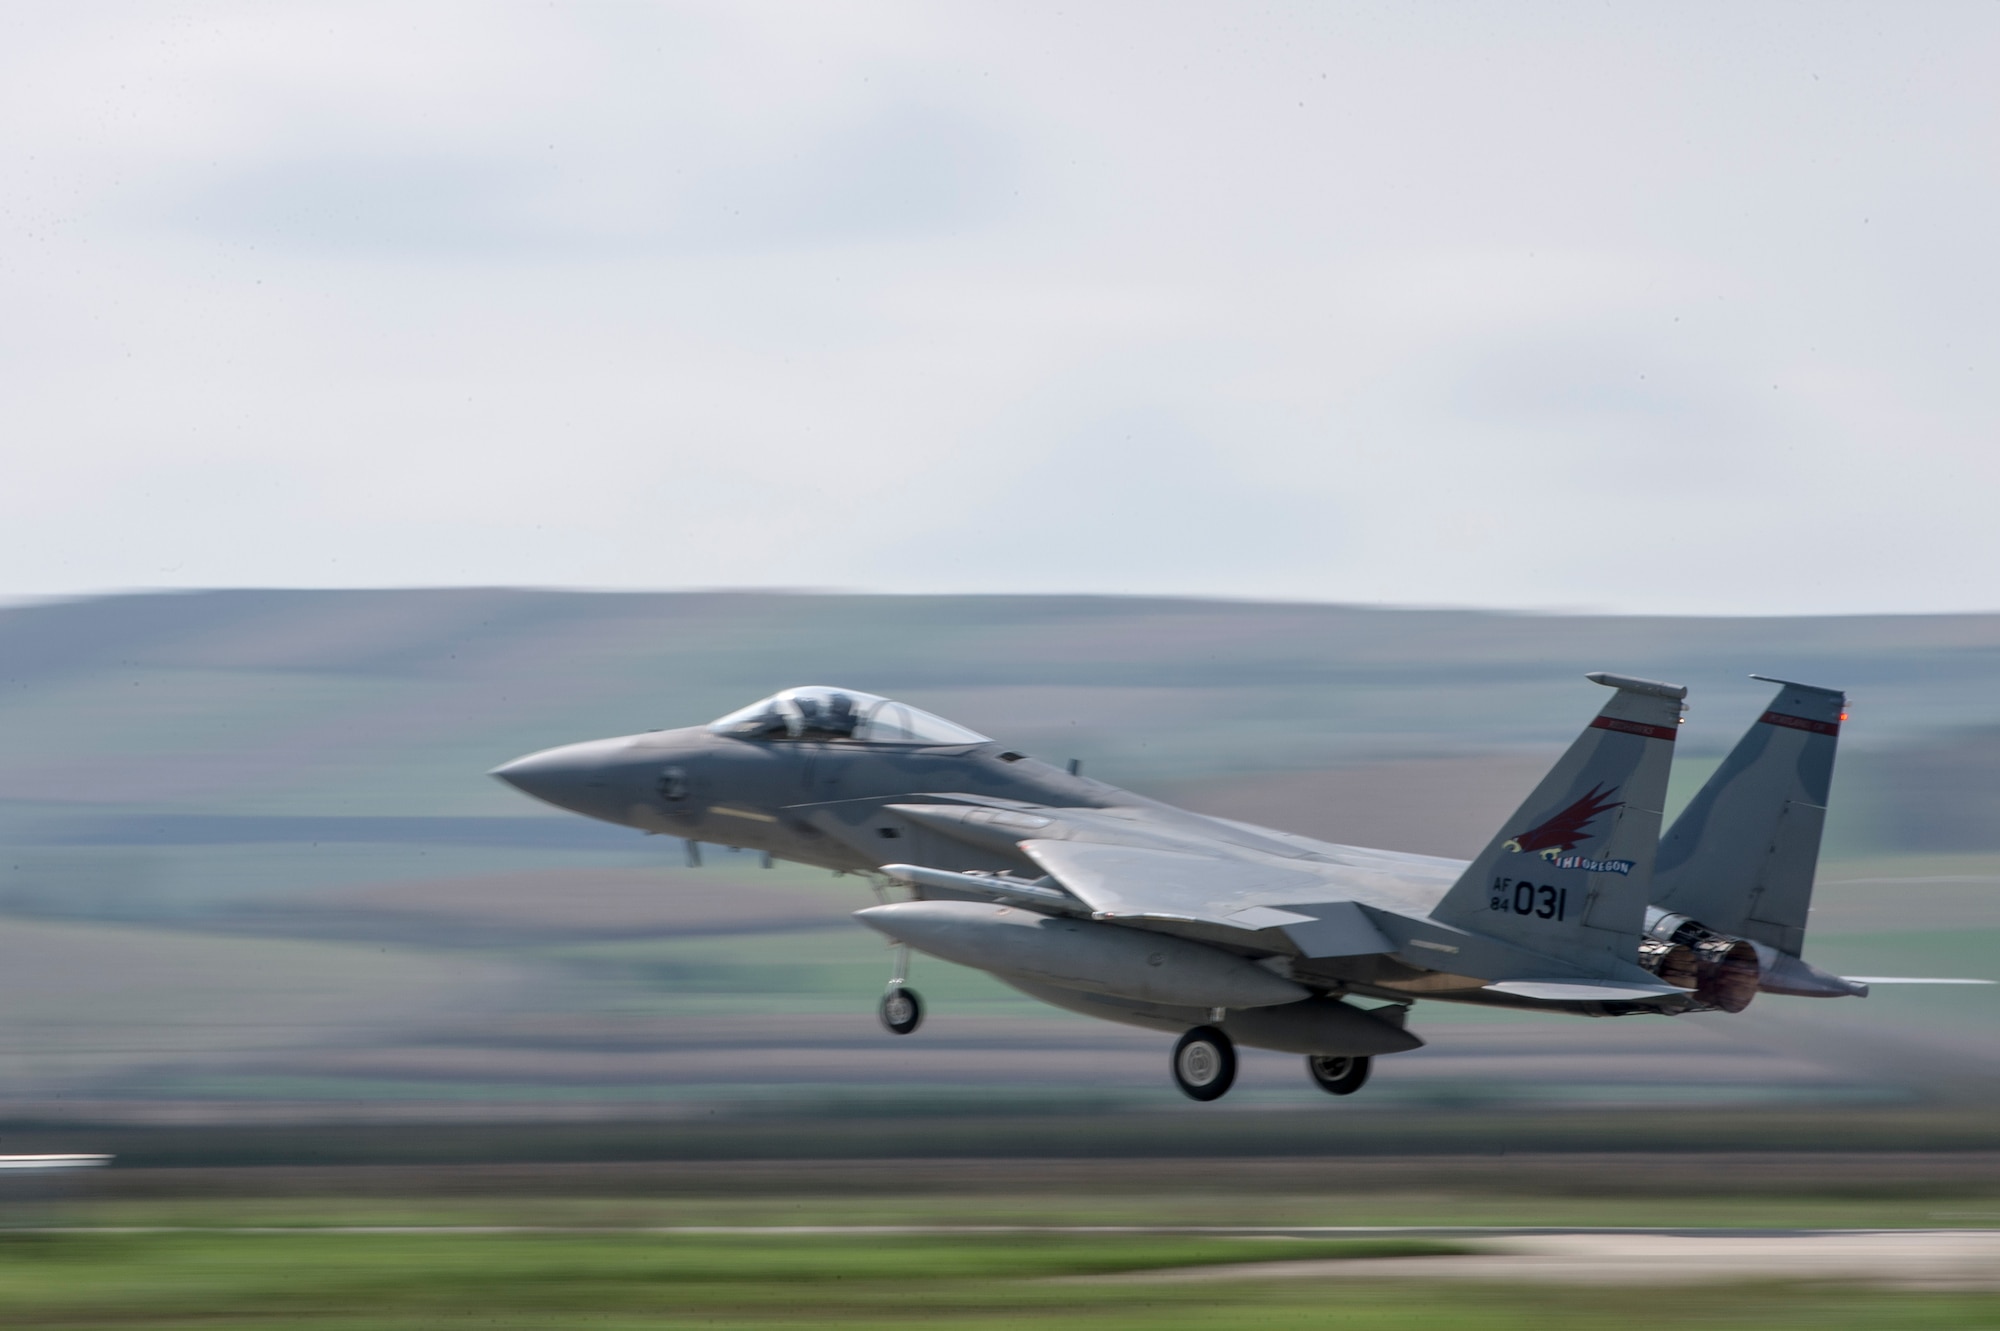 An F-15C Eagle fighter aircraft assigned to the 123rd Expeditionary Fighter Squadron, 142nd Fighter Wing, Oregon Air National Guard, takes off from the runway during a theater security package deployment Sept. 25, 2015, at Campia Turzii, Romania. The first TSP concludes with the departure of the 123rd EFS but a constant presence remains in Europe with the arrival of U.S. Air Force A-10C Thunderbolt IIs attack aircraft from the 74th Expeditionary Fighter Squadron, 23rd Wing at Moody Air Force Base, Ga. (U.S. Air Force photo by Staff Sgt. Christopher Ruano/Released)